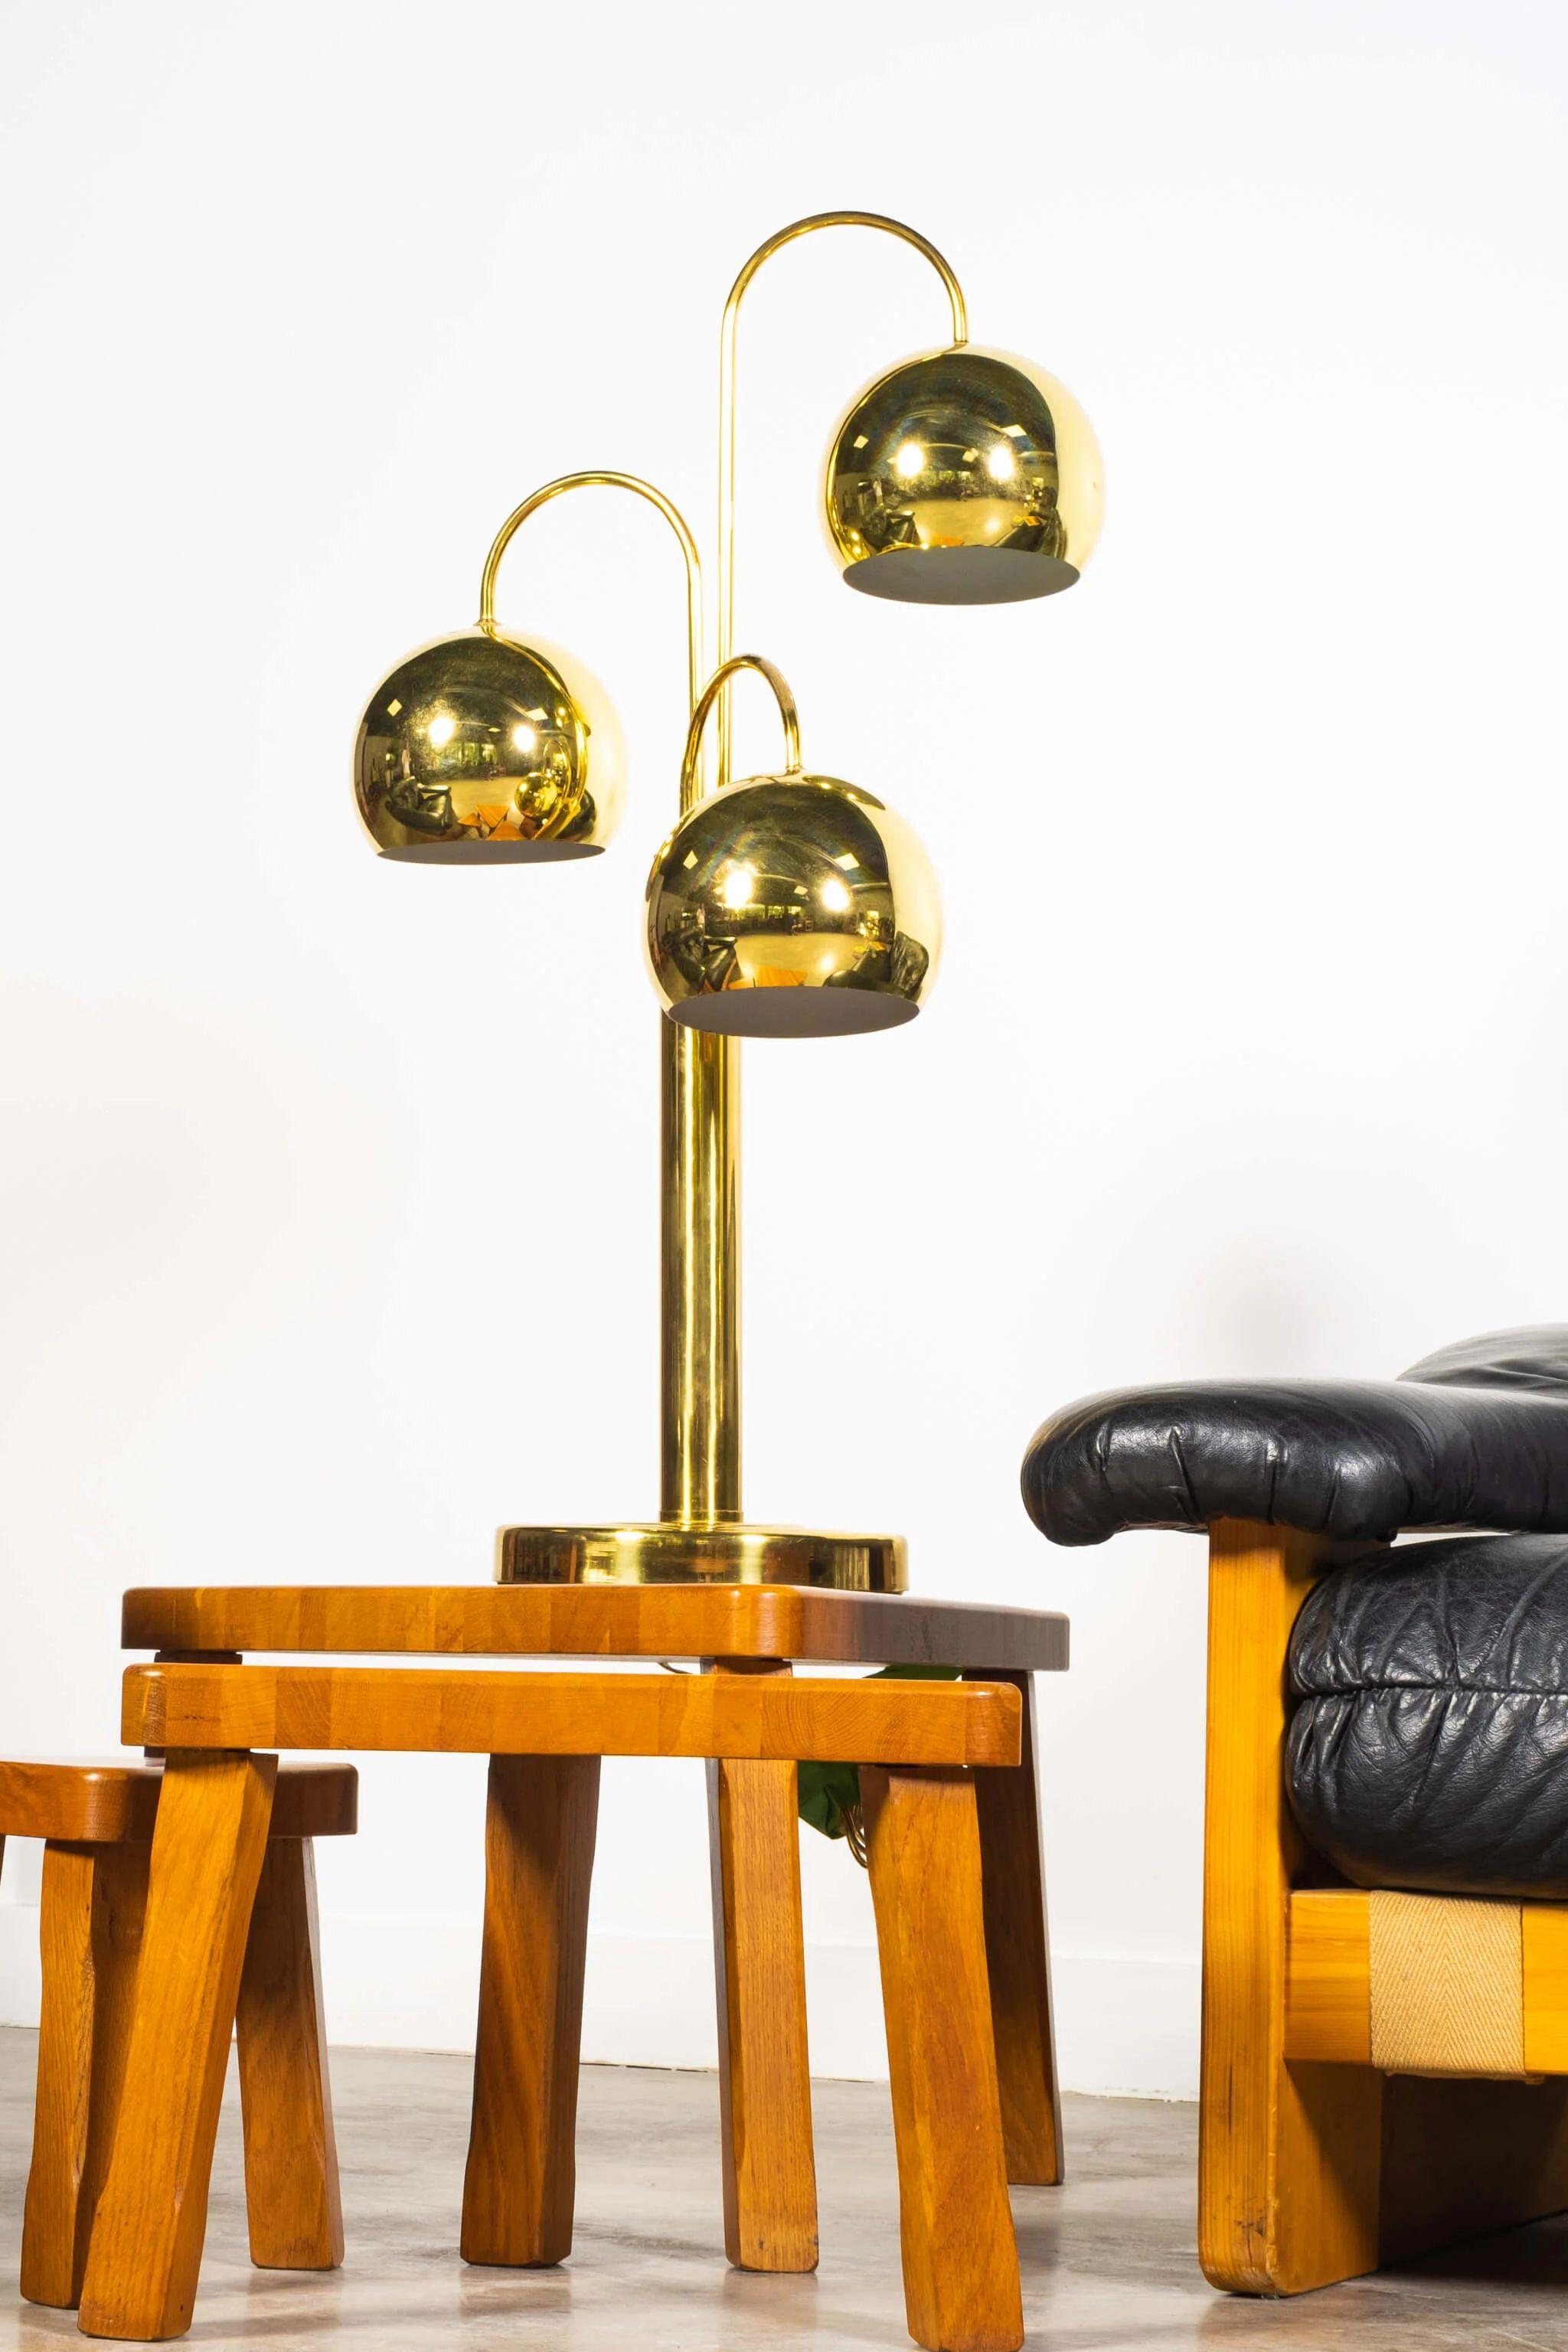 Pair of tall brass “eyeball” table lamps by Robert Sonneman. Among Sonneman’s hallmark 1970s waterfall design, his work features unconventional treatments toward shape and balance, often inspired by modern architecture. The designer once said of his